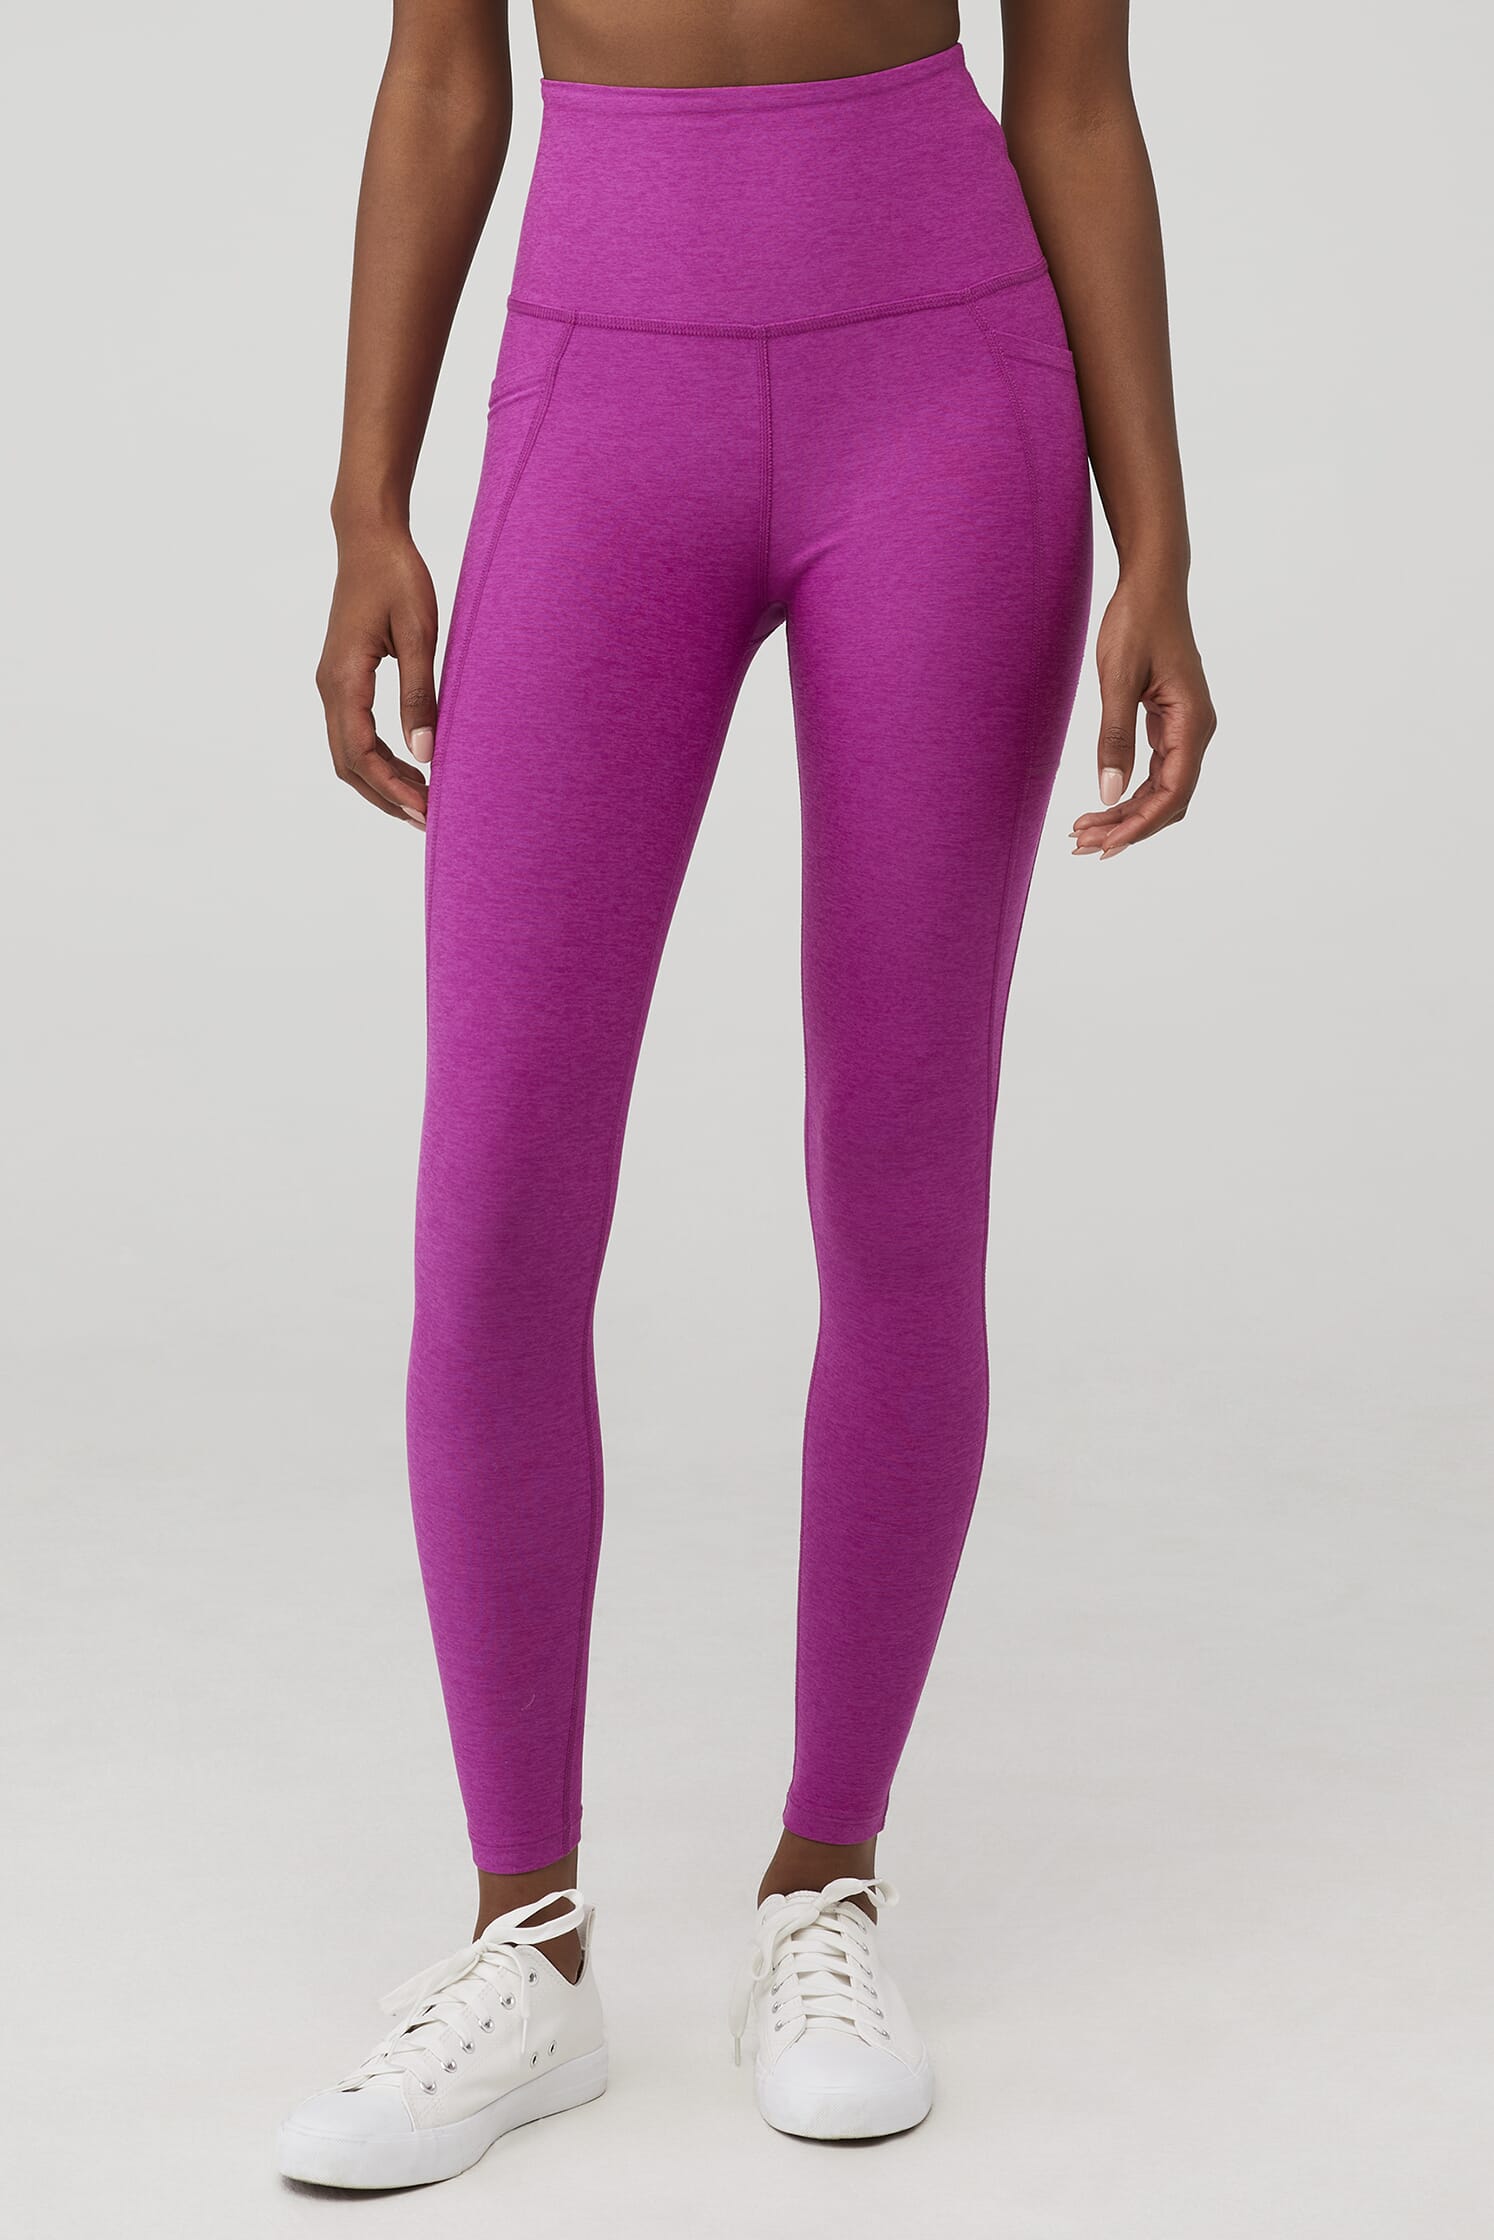 Beyond Yoga  Spacedye Out Of Pocket High Waisted Midi Legging in